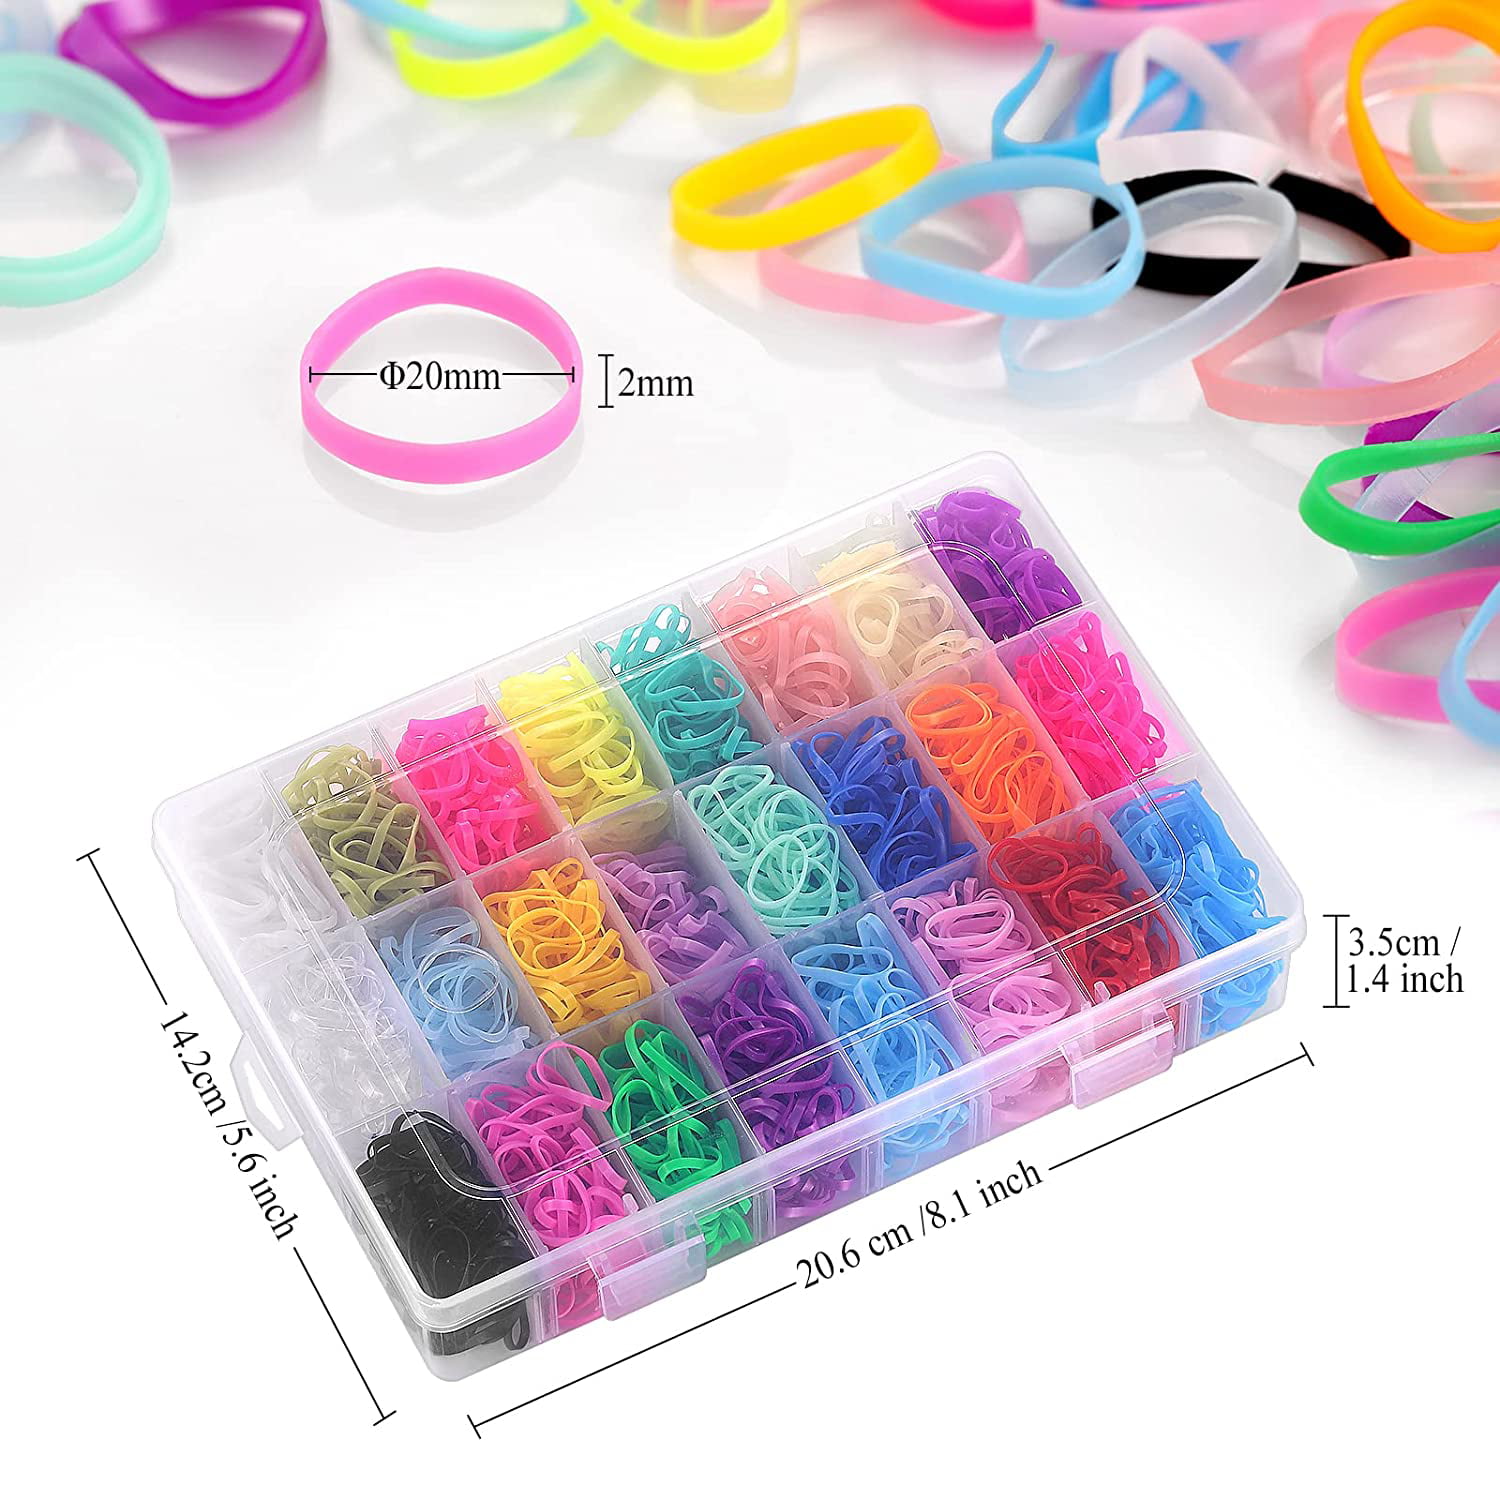 Hair Rubber Bands, 1500 Pcs Small Elastic Hair Ties with Organizer Box  Colorful Hair Ties for Girls, Mini Kids Hair Elastics Baby Hair Ties for  Thin or Thick Hair (24 Colors) 